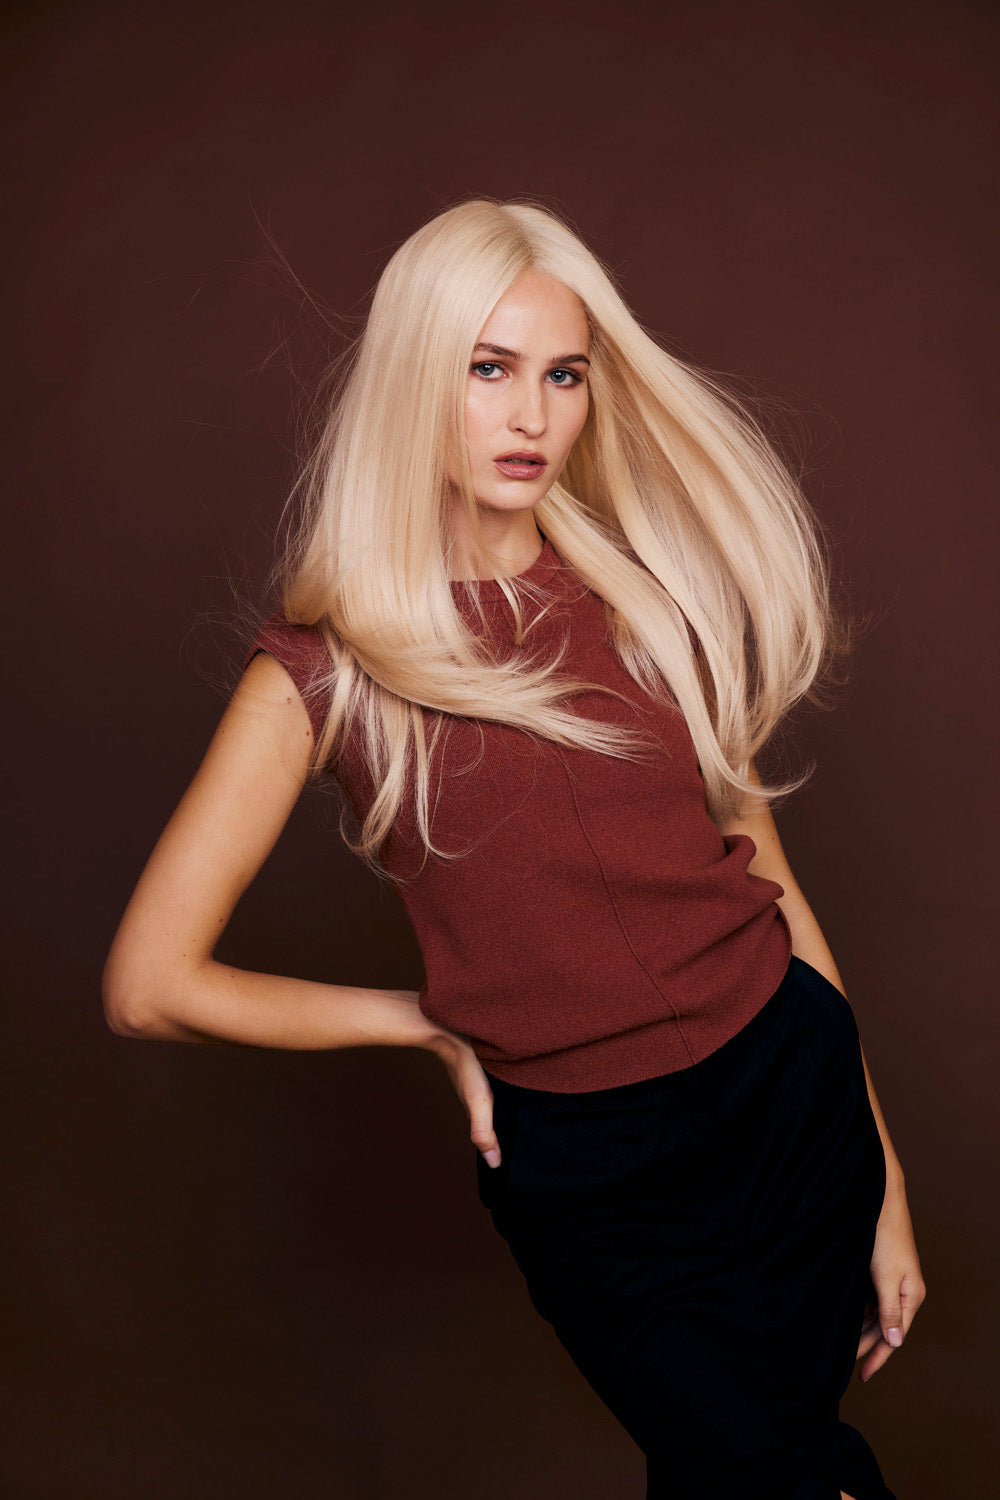 Model wears BHBD pure wig: 45 cm in Platinum blonde perfection! Our Remy human hair wig is soft, tangle-free & features a natural hairline. 